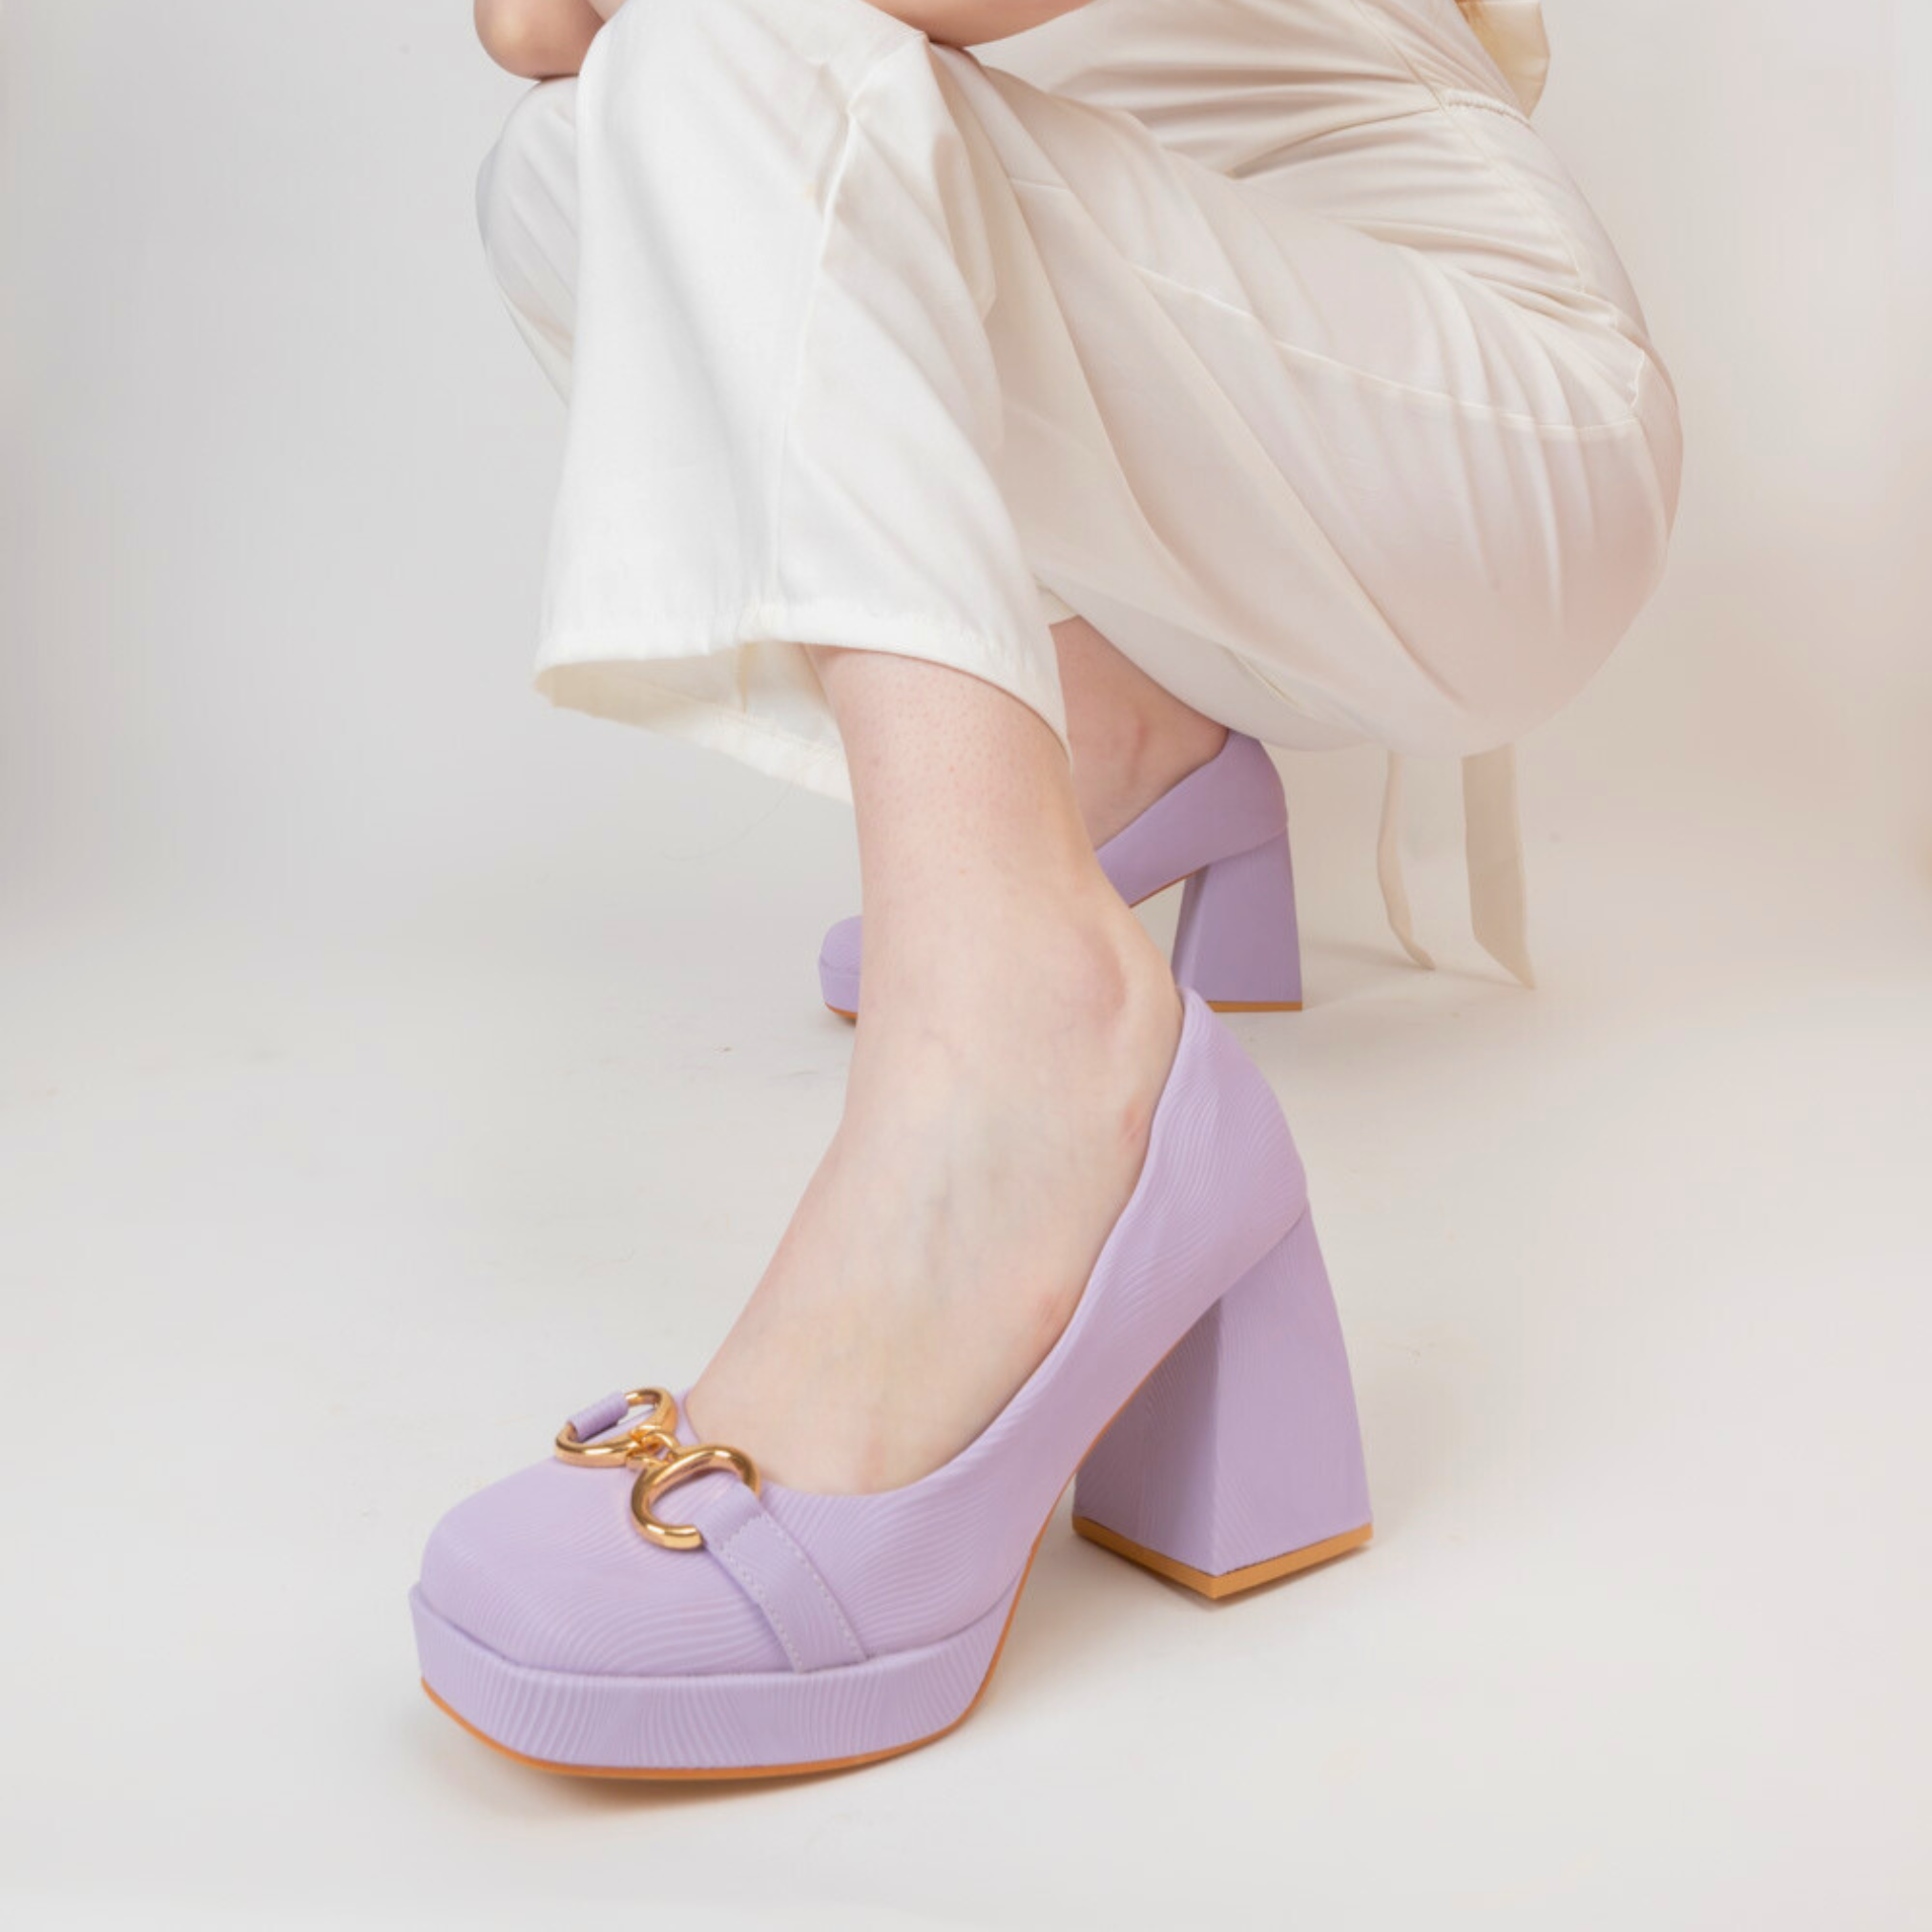 Vintage Gladiator Pink Heeled Sandals With Chunky Heel And Lavender Flower  Accents For Womens Summer Parties And Weddings From Factoryshoesshop2,  $94.78 | DHgate.Com